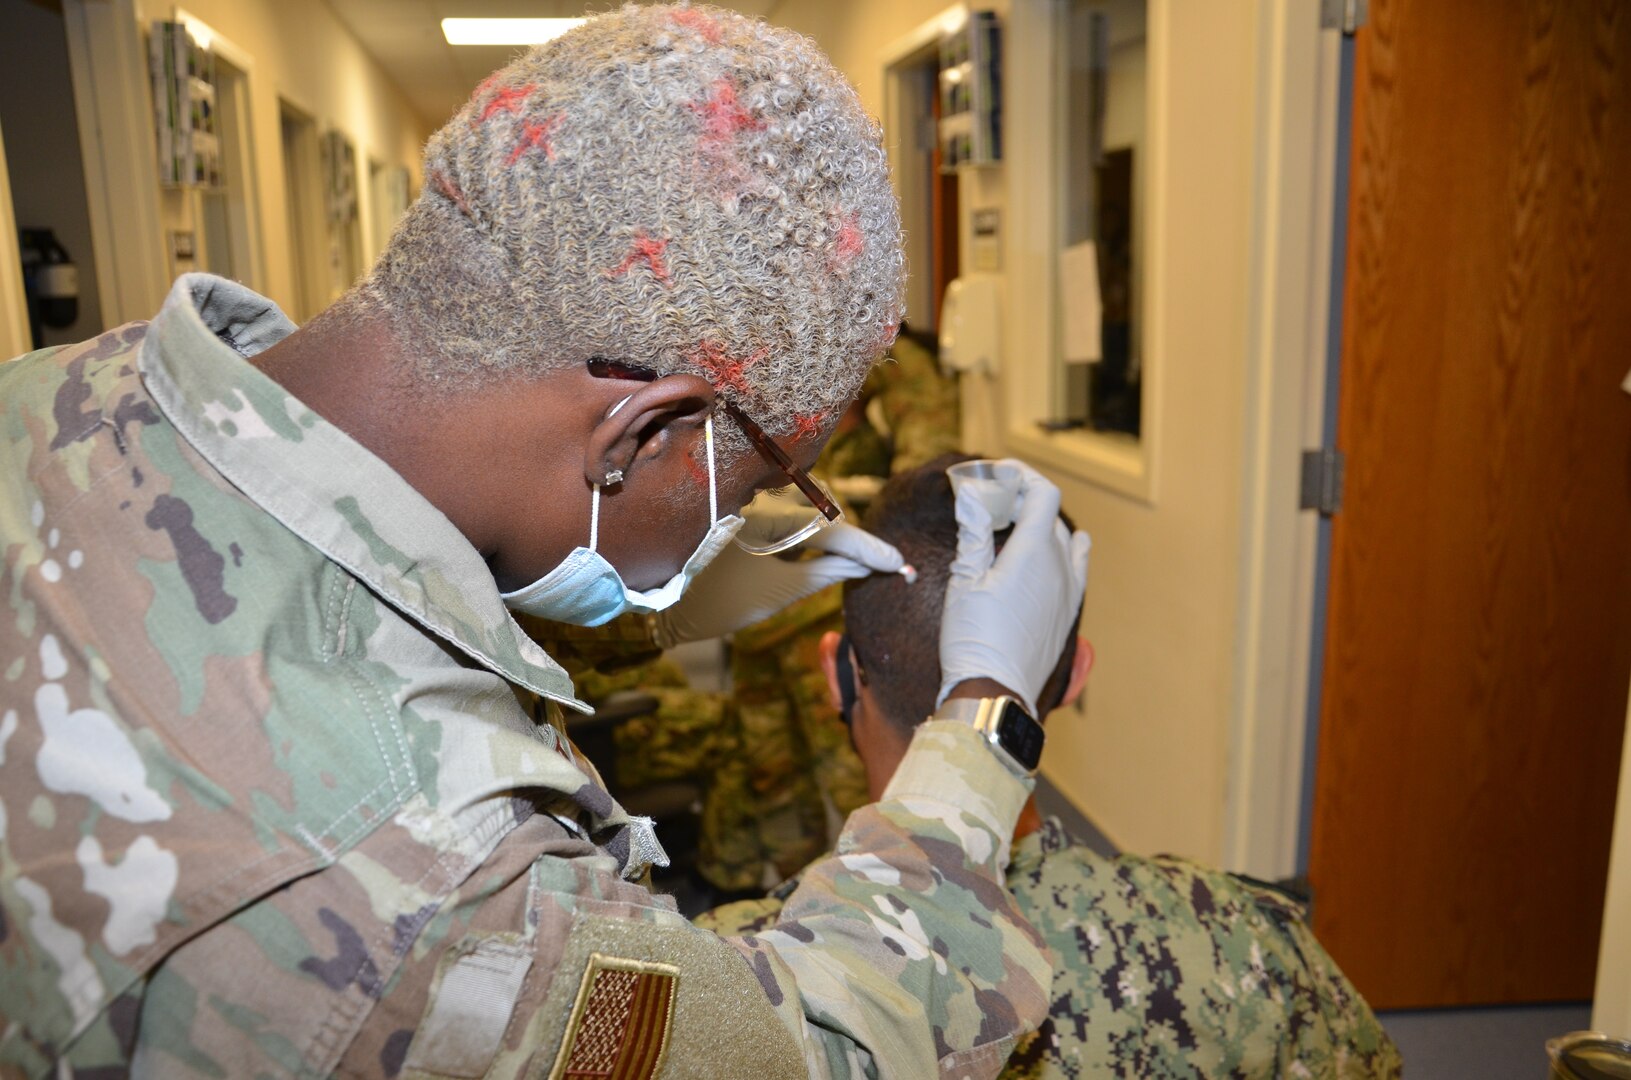 Air Force Senior Airman Jamila Basit, a student in the Neurodiagnostic Technician program at the Medical Education and Training Campus, practices the electrode application method required for performance of the Electroencephalogram (EEG) on fellow student, Navy Seaman Marcus Falcon.